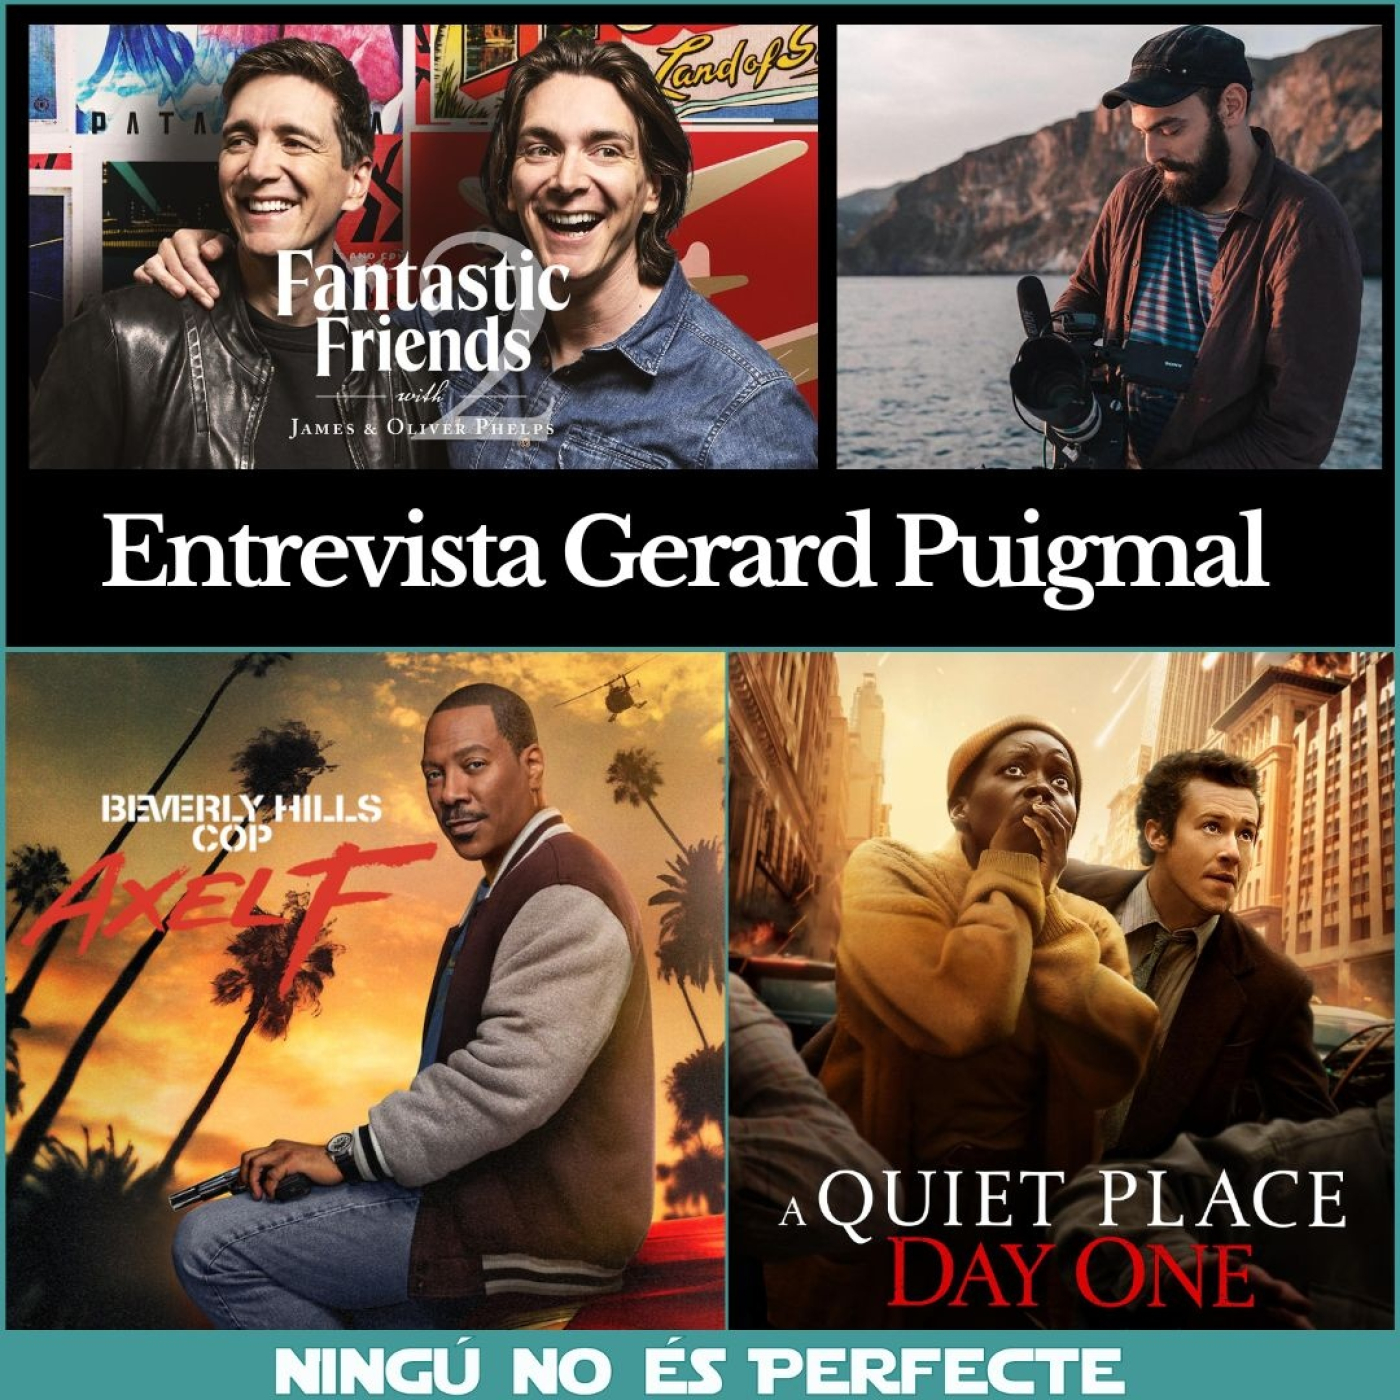 NNEP 23×43 – Gerard Puigmal: Fantastic Friends, Superdetectiu a Hollywood: Axel F i A Quiet Place: Day 1